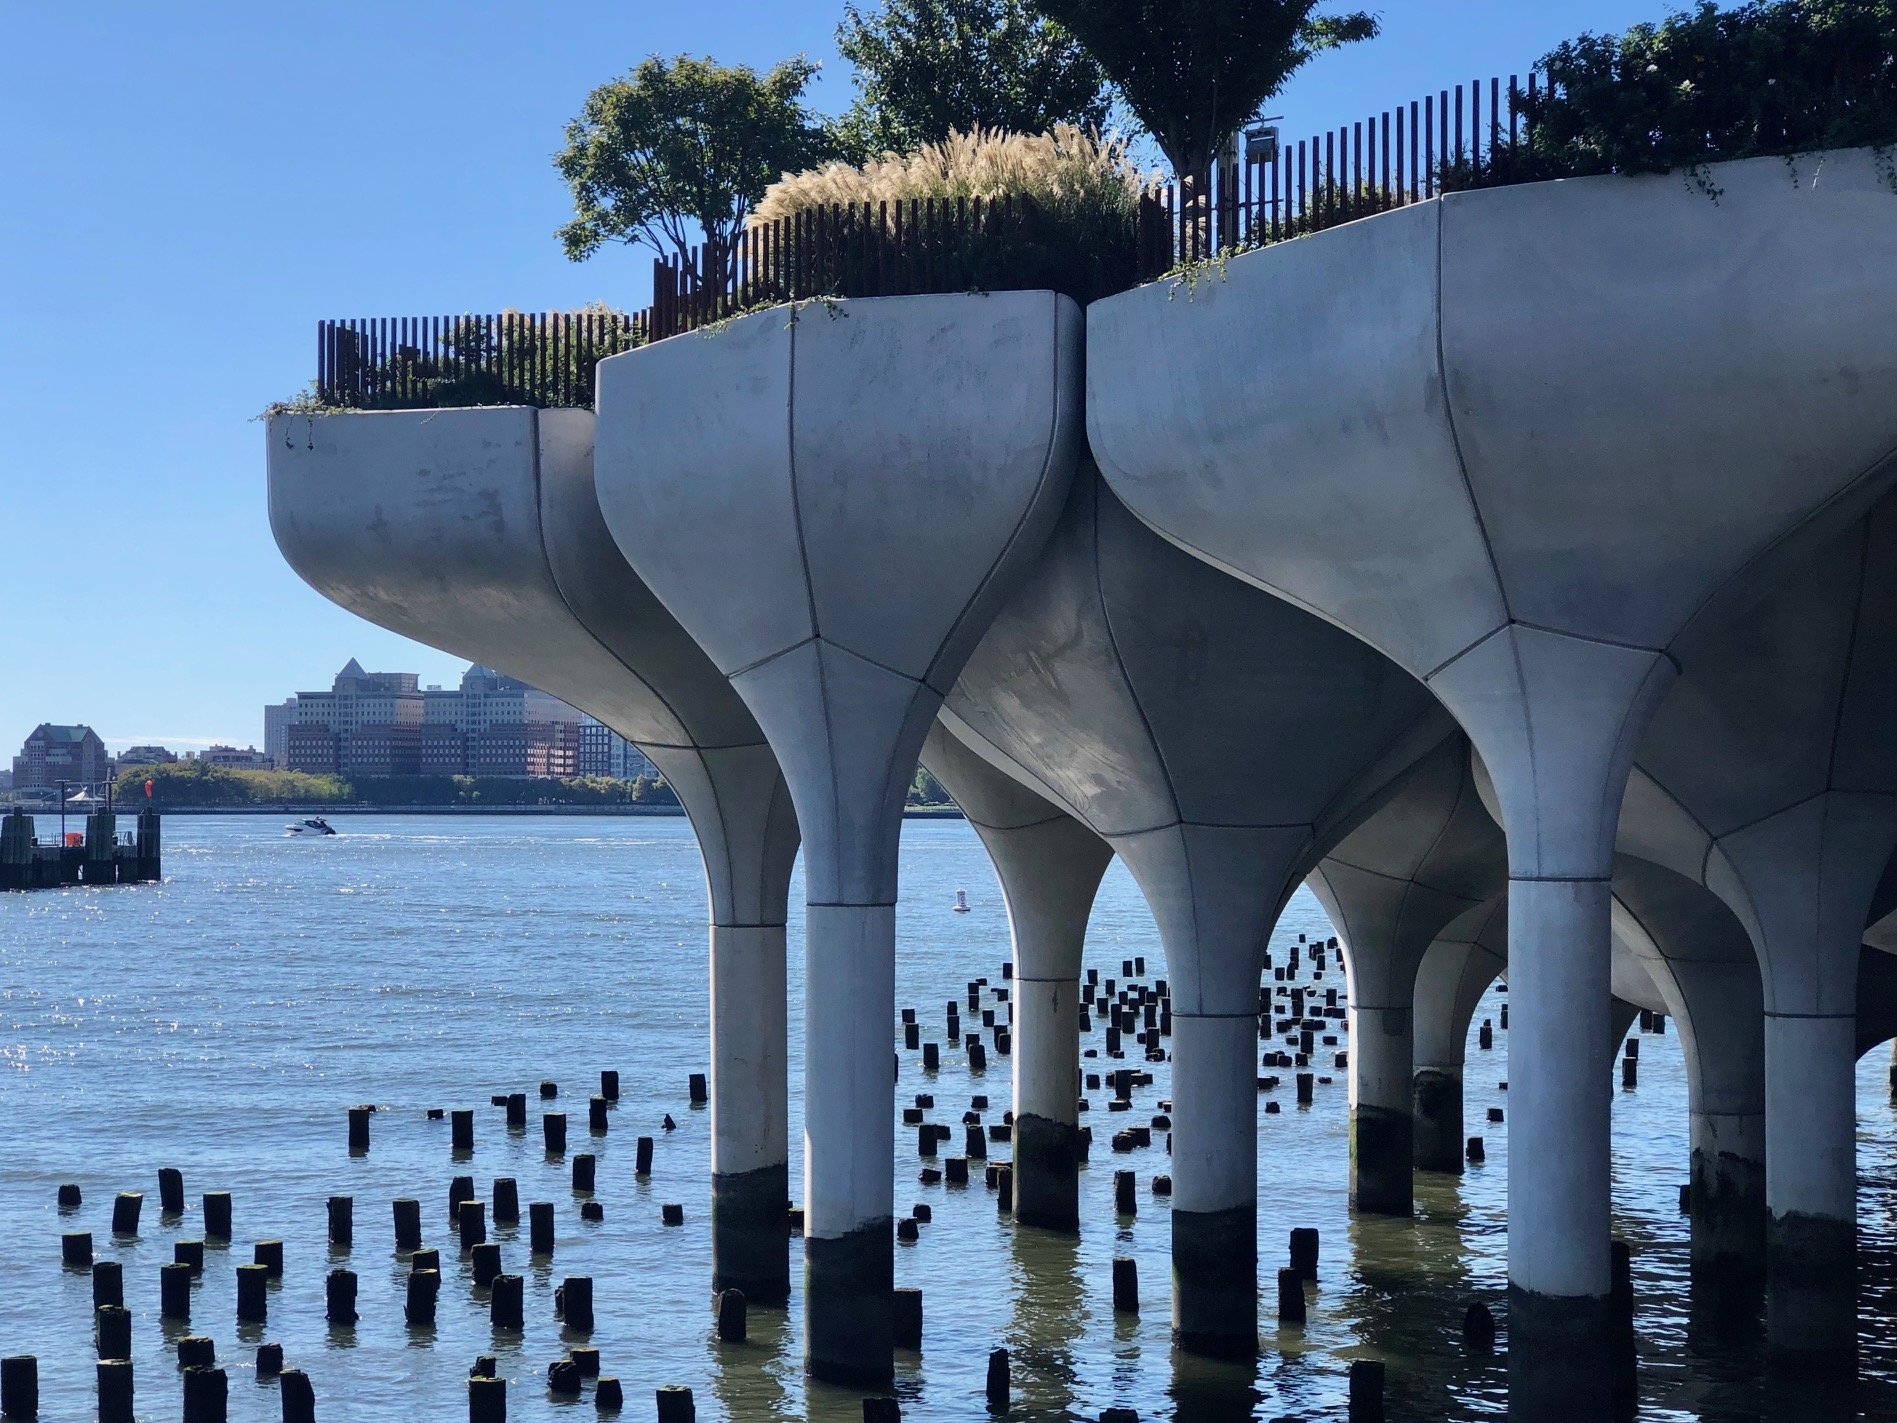  The new structures of the island sit amongst the pillars of older piers in the river. 